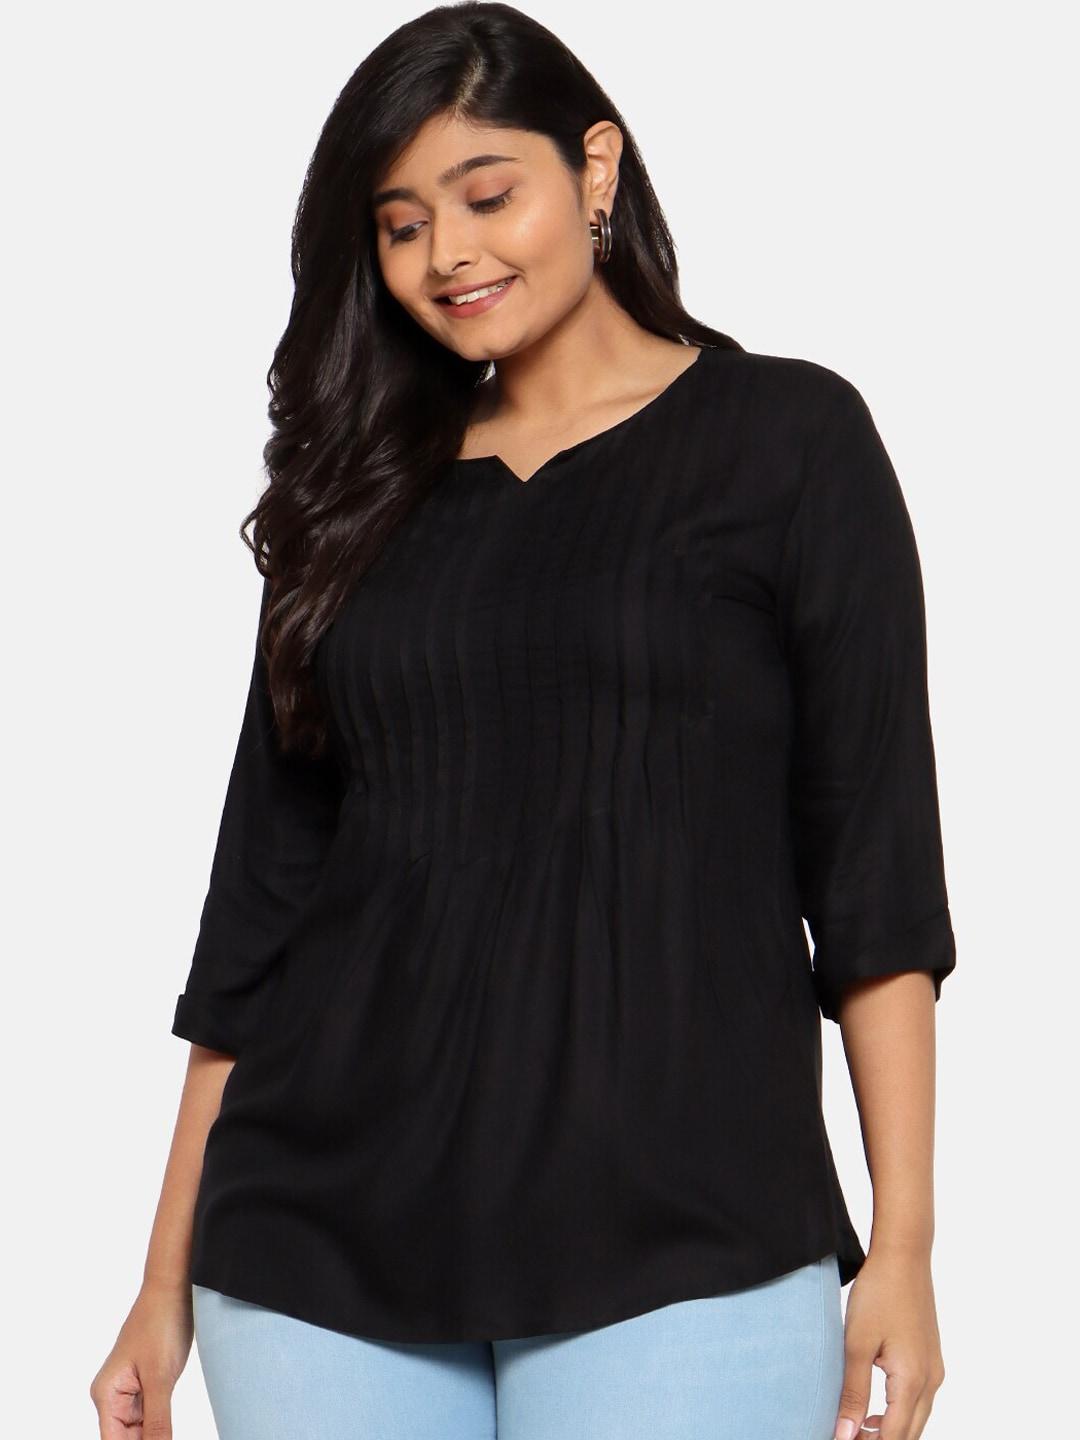 the-pink-moon-women-black-solid-pleated-top